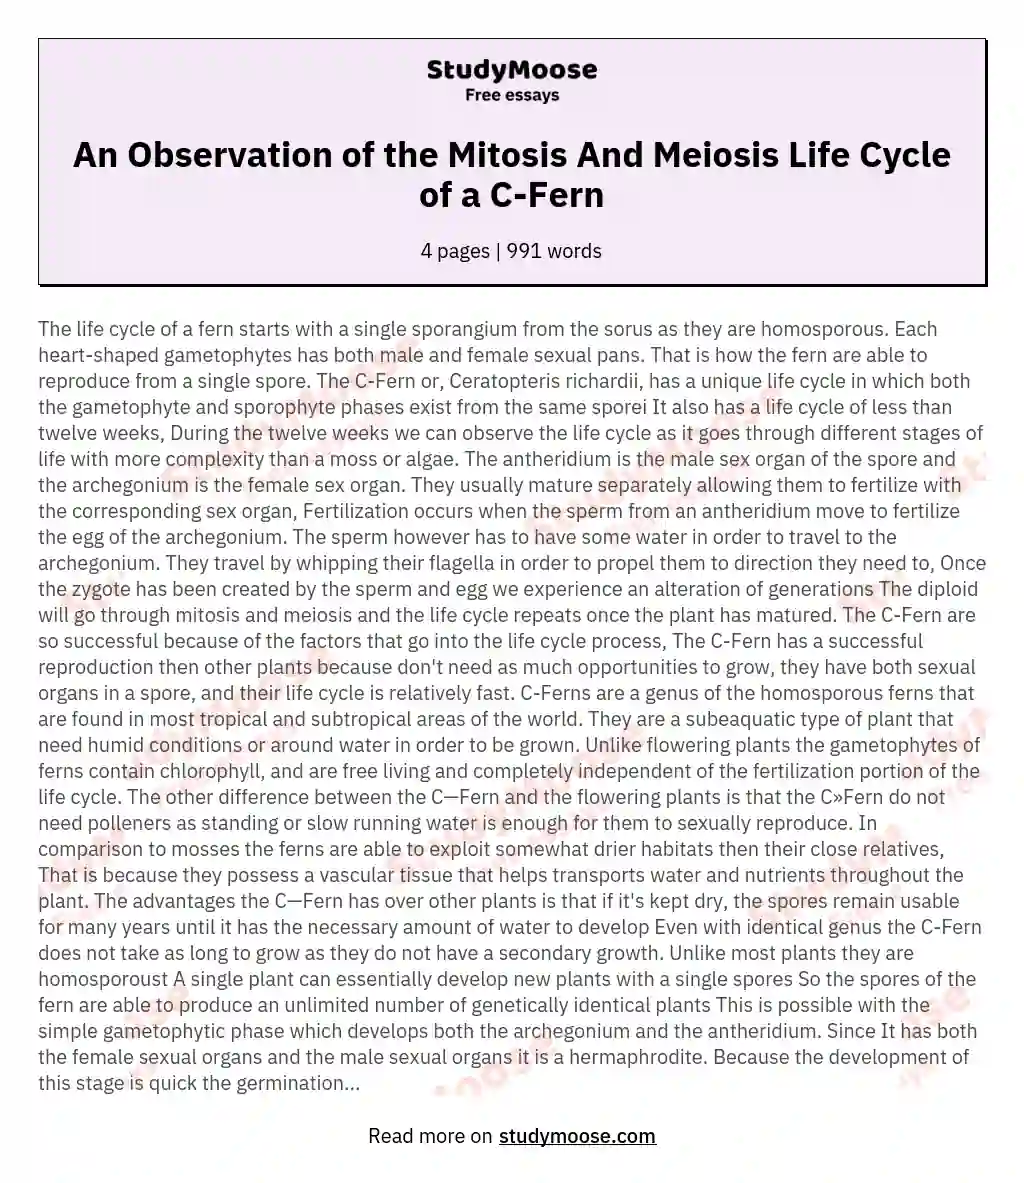 An Observation of the Mitosis And Meiosis Life Cycle of a C-Fern essay